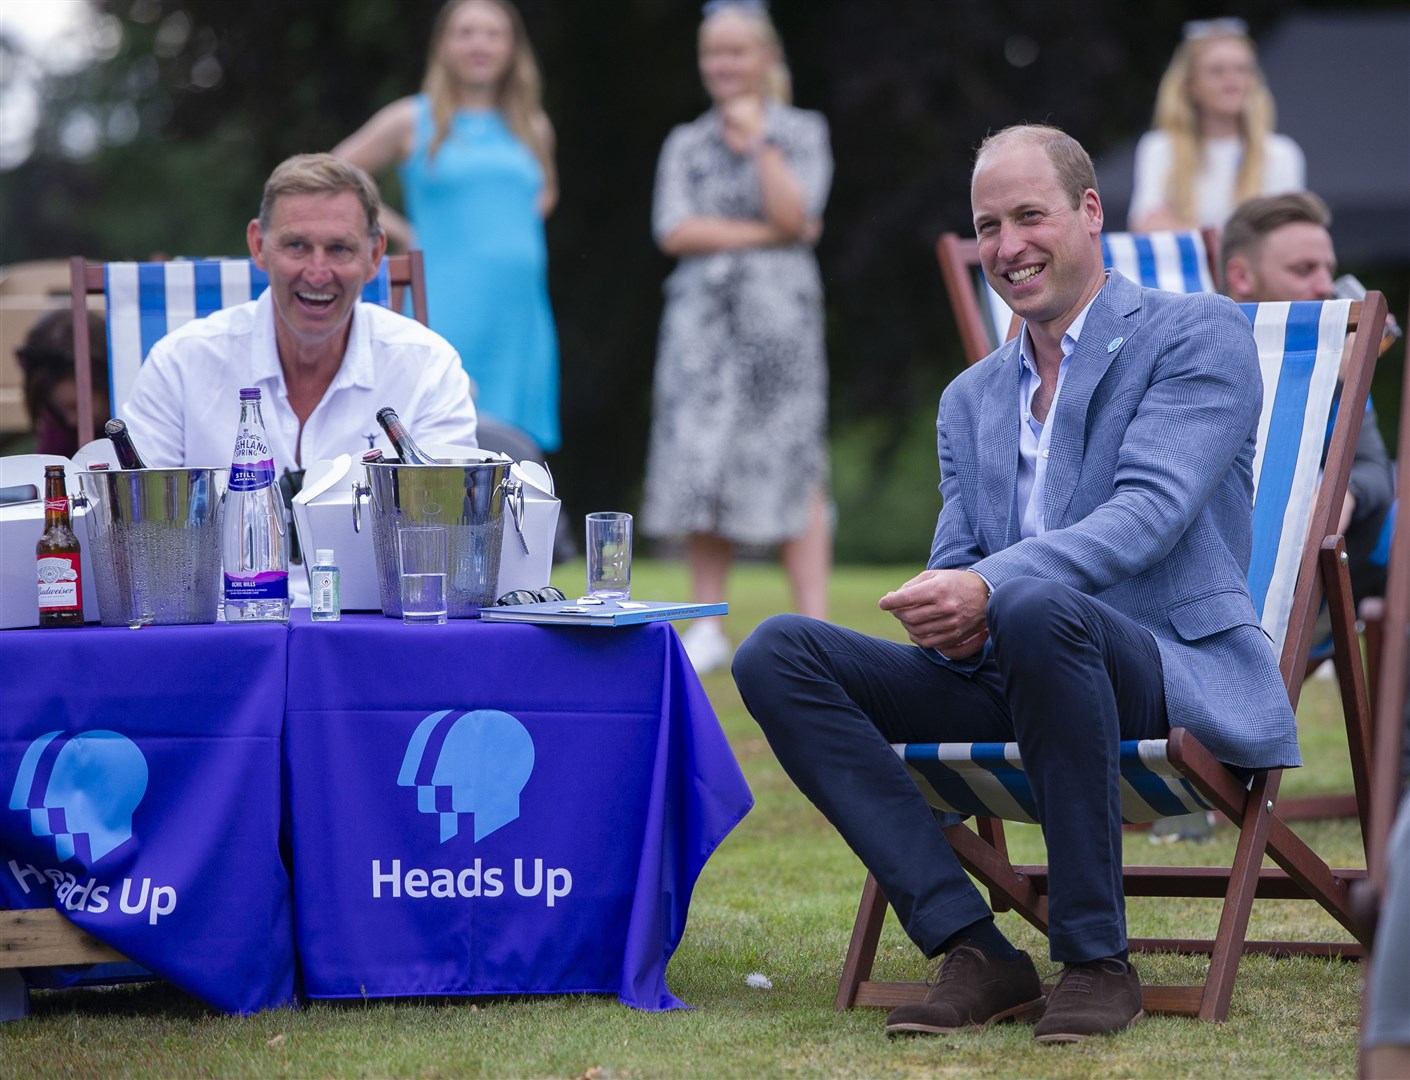 William with former Arsenal player Tony Adams at an event at Sandringham in 2020 to mark the launch of the Heads Up campaign (Tim Merry/Daily Express/PA)